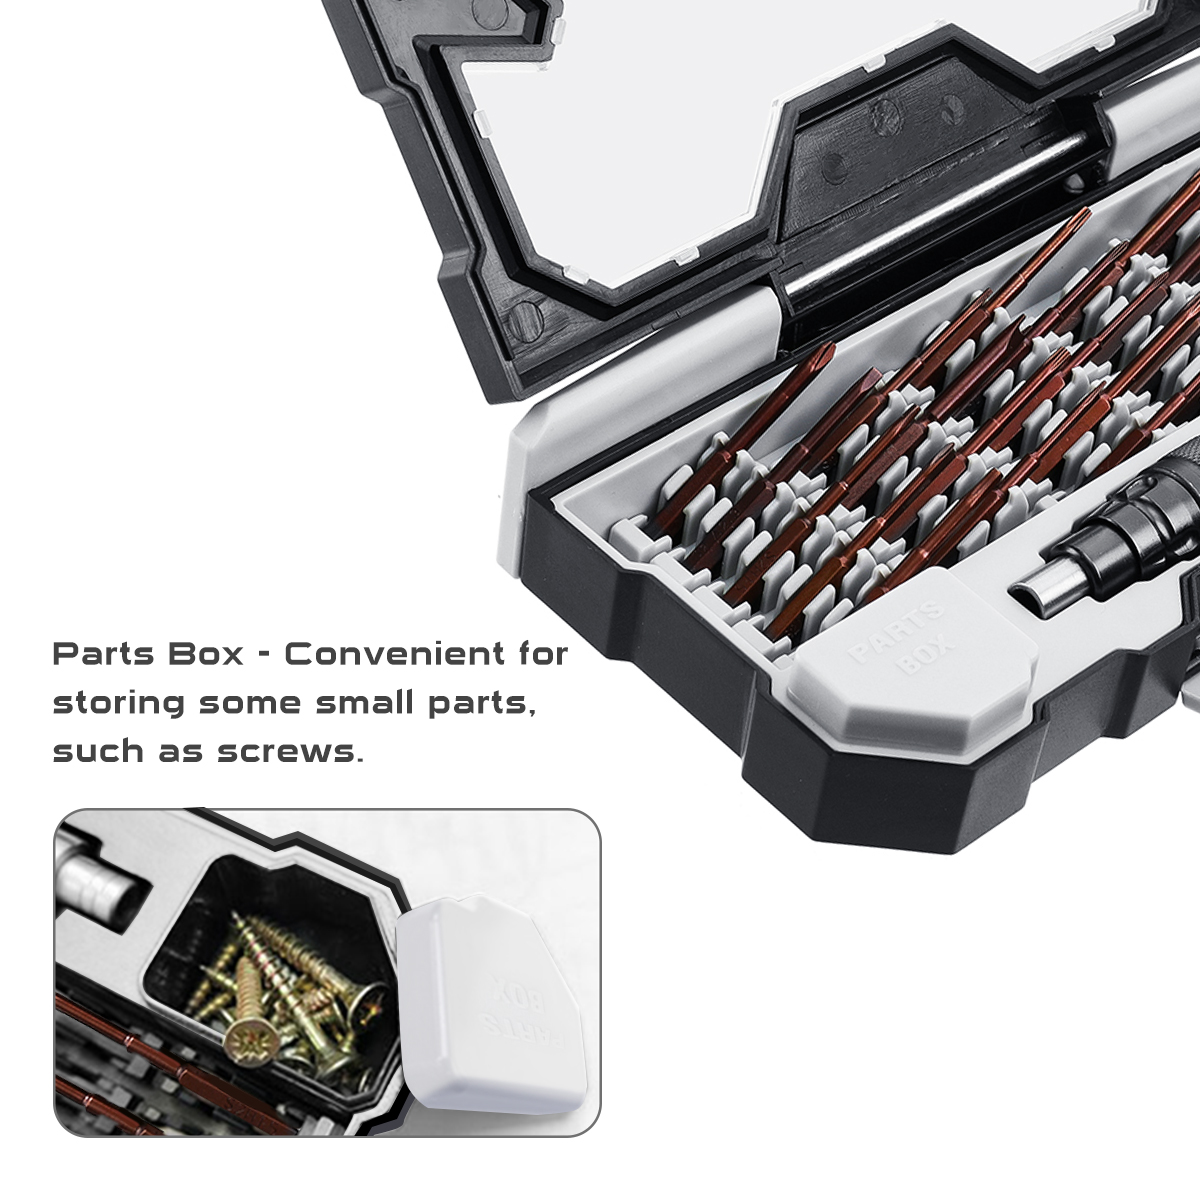 Baban-24-In-1-Precision-Screwdriver-Set-Screwdriver-Combination-For-iPhone-Computer-Notebook-Disasse-1960898-8